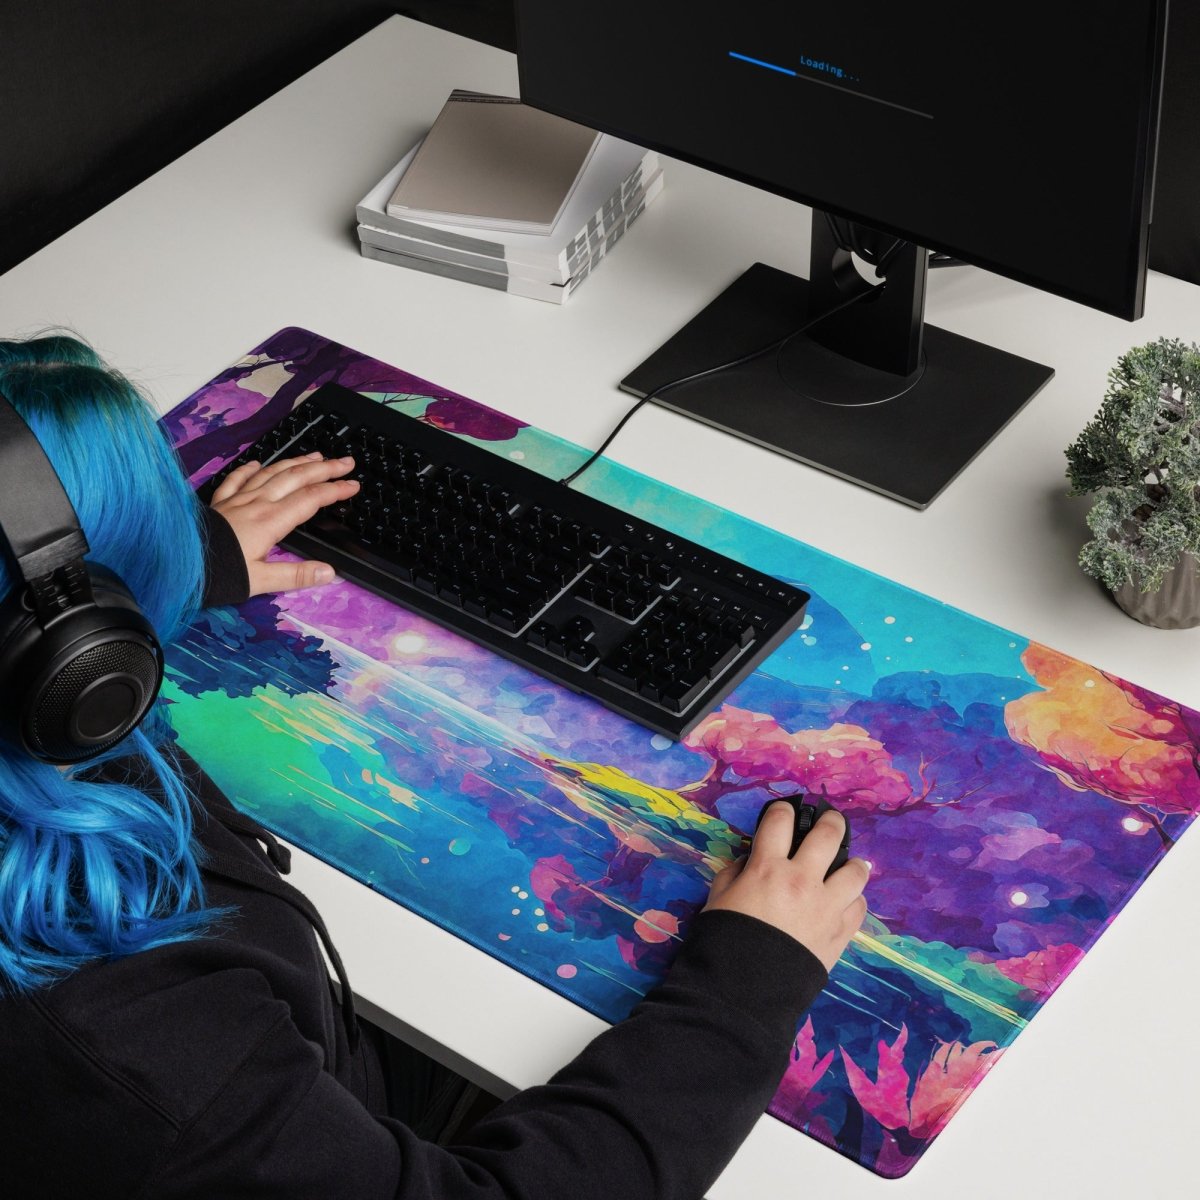 Colourful world - Gaming mouse pad - Ever colorful